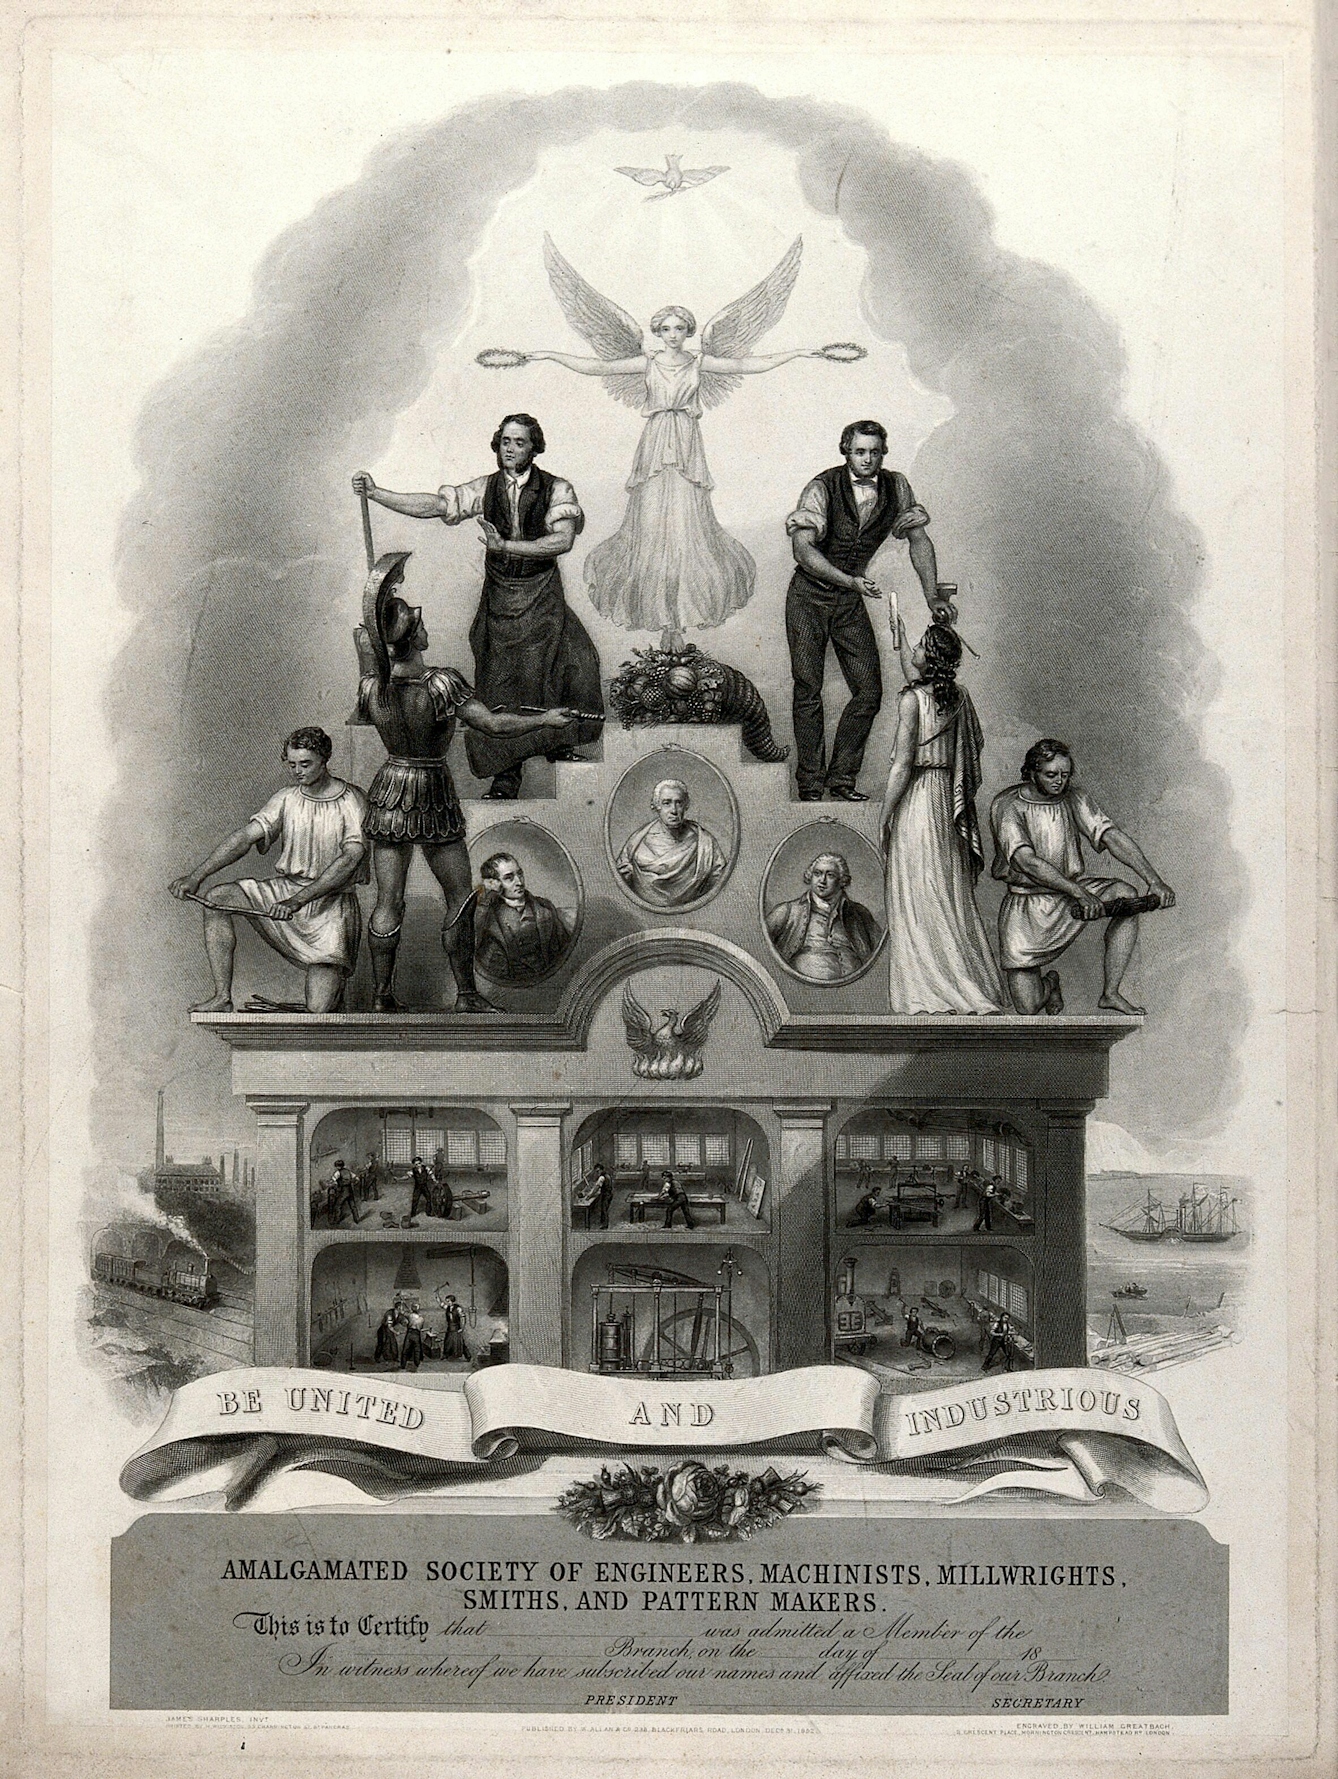 Engraving showing three plinths of different levels. On the highest, most central plinth, there is a winged angel holding two wreaths with her arms outstretched. Underneath these wreaths on the next plinths are two men wearing waistcoats. Behind the angel is a flying dove and a beaming sun, suggestive of the heavens. On the lower plinths there is a woman in a long dress looking up at the man on the right. On the left there is a soldier dressed in armour looking up at the man on the right. On the lowest, outer plinths are two men kneeling down and holding wood. Underneath the plinths is a sign that reads 'Be united and industrious'. In the background to the right there are ships in the sea. In the background to the left is a steam train and a factory with chimneys emitting smoke. 